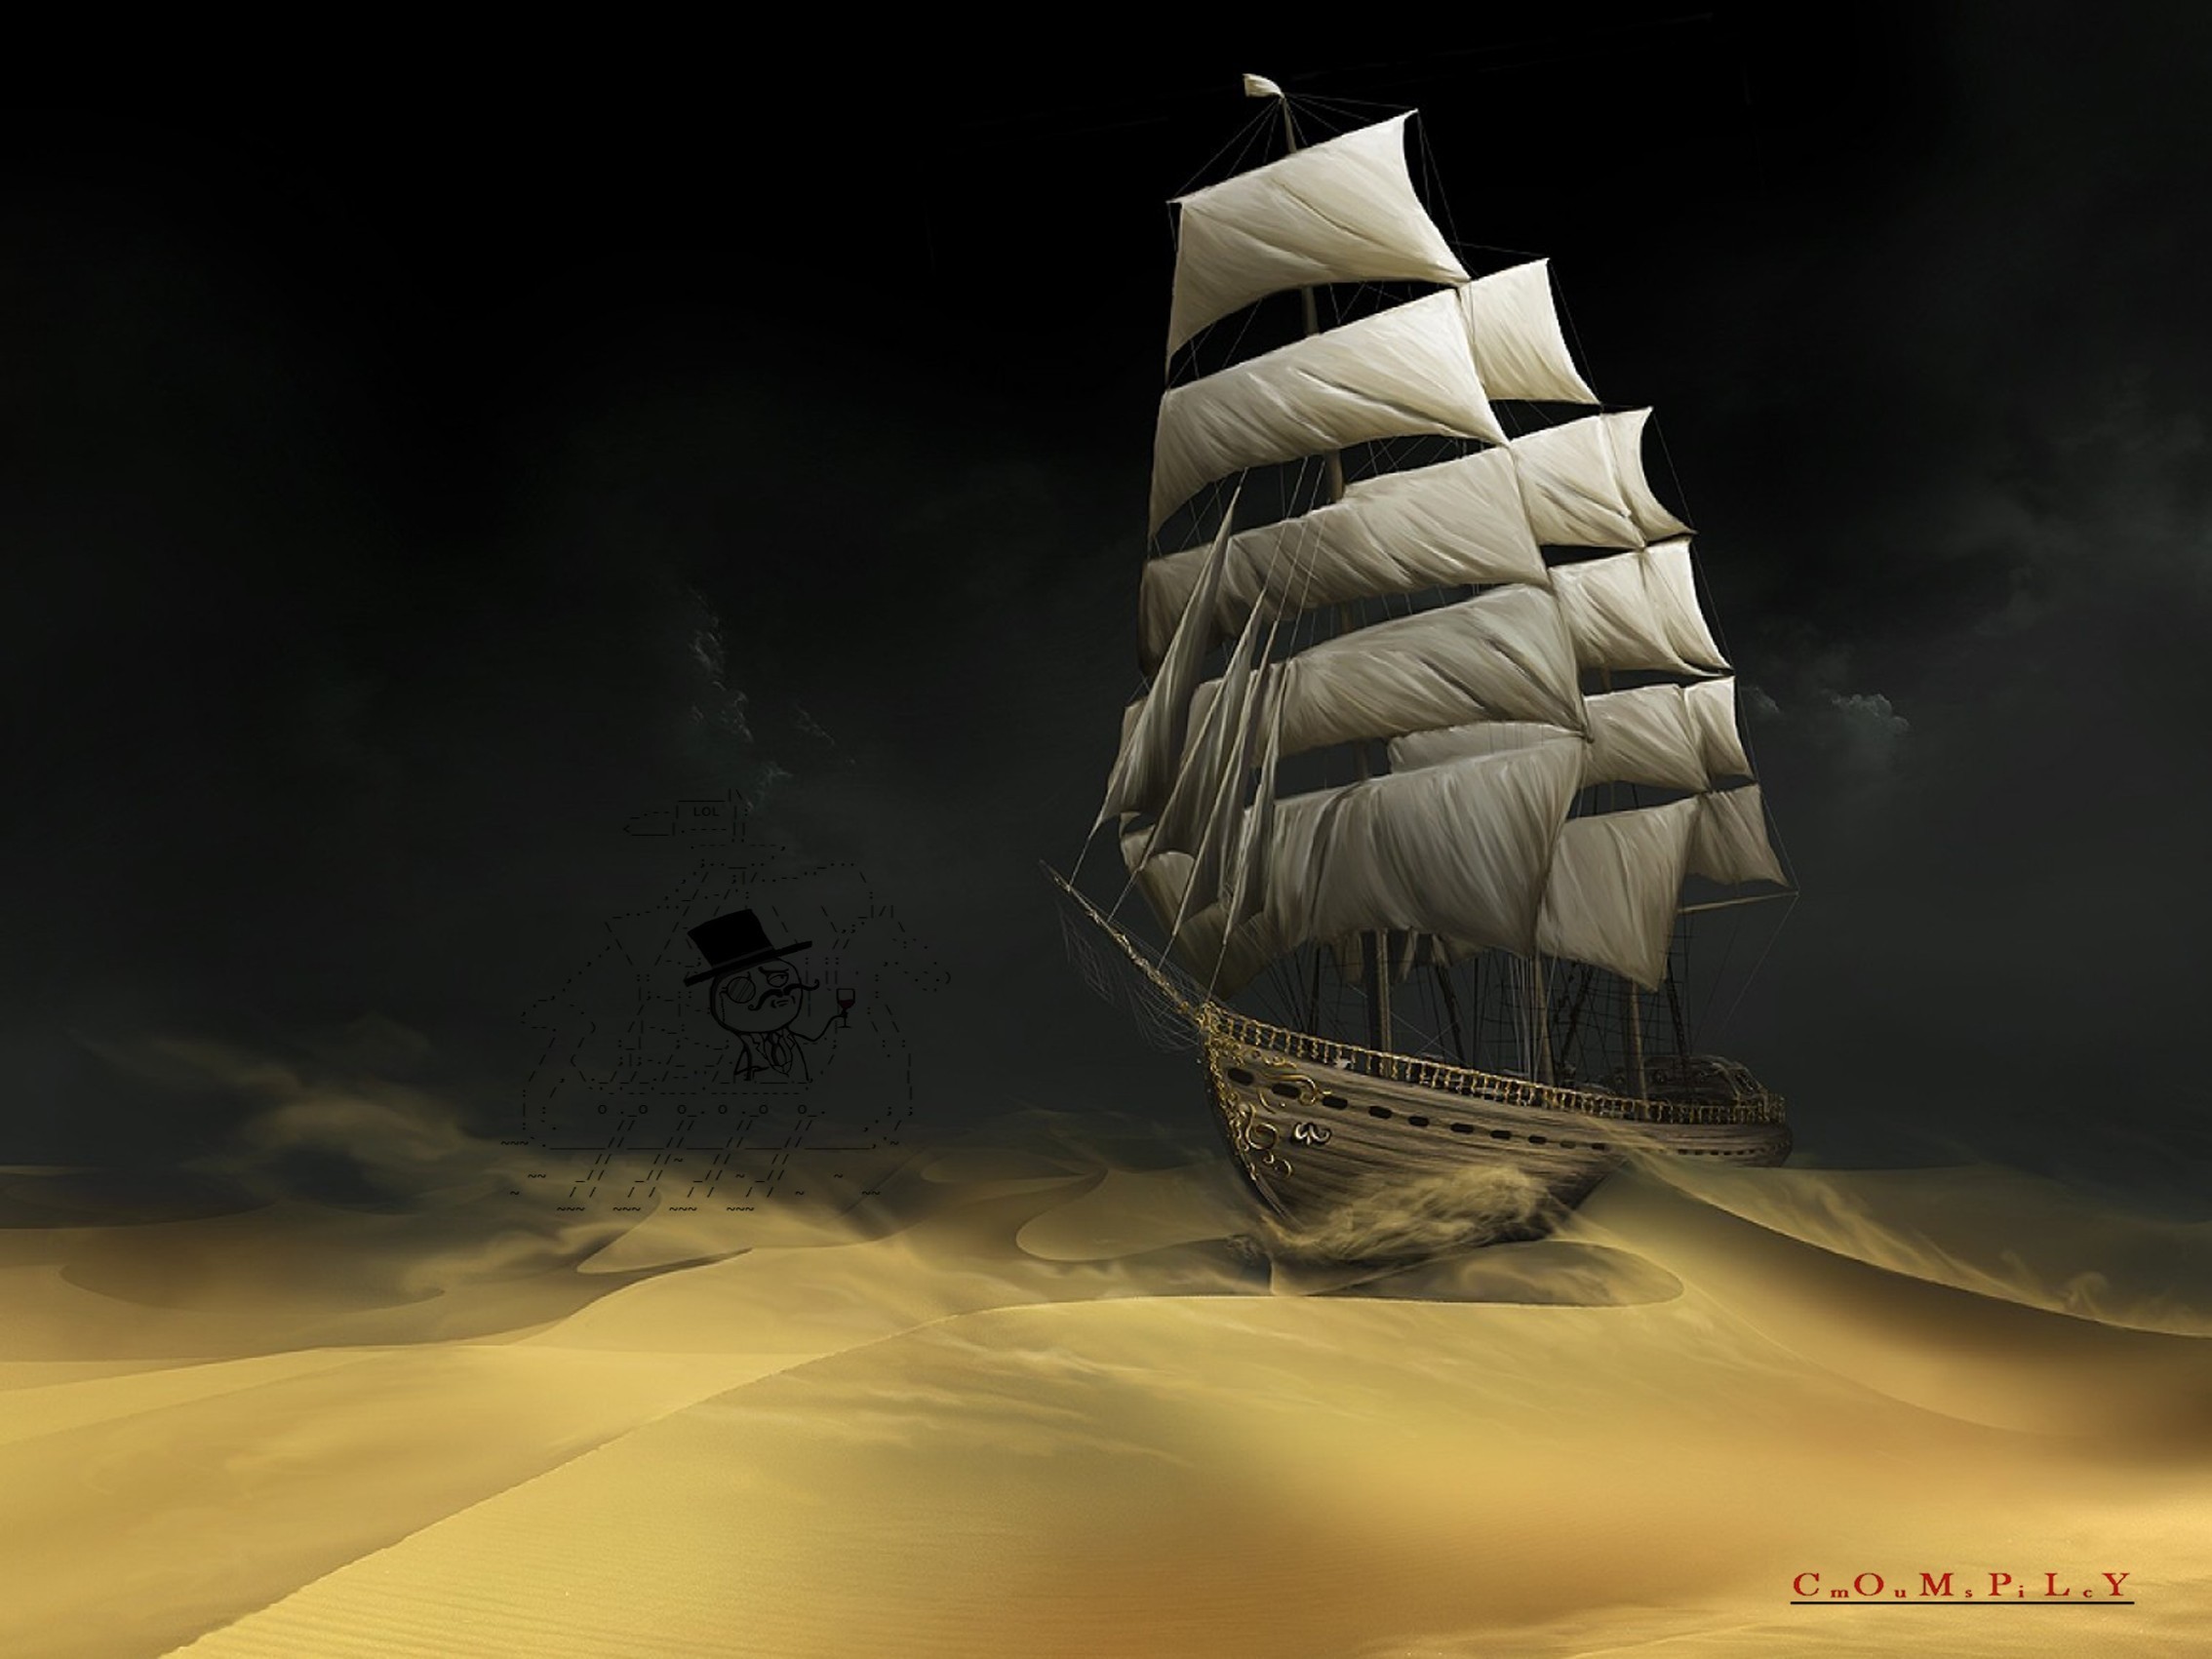 2268x1701 The adventures of tintin deserts sand ships wallpaper